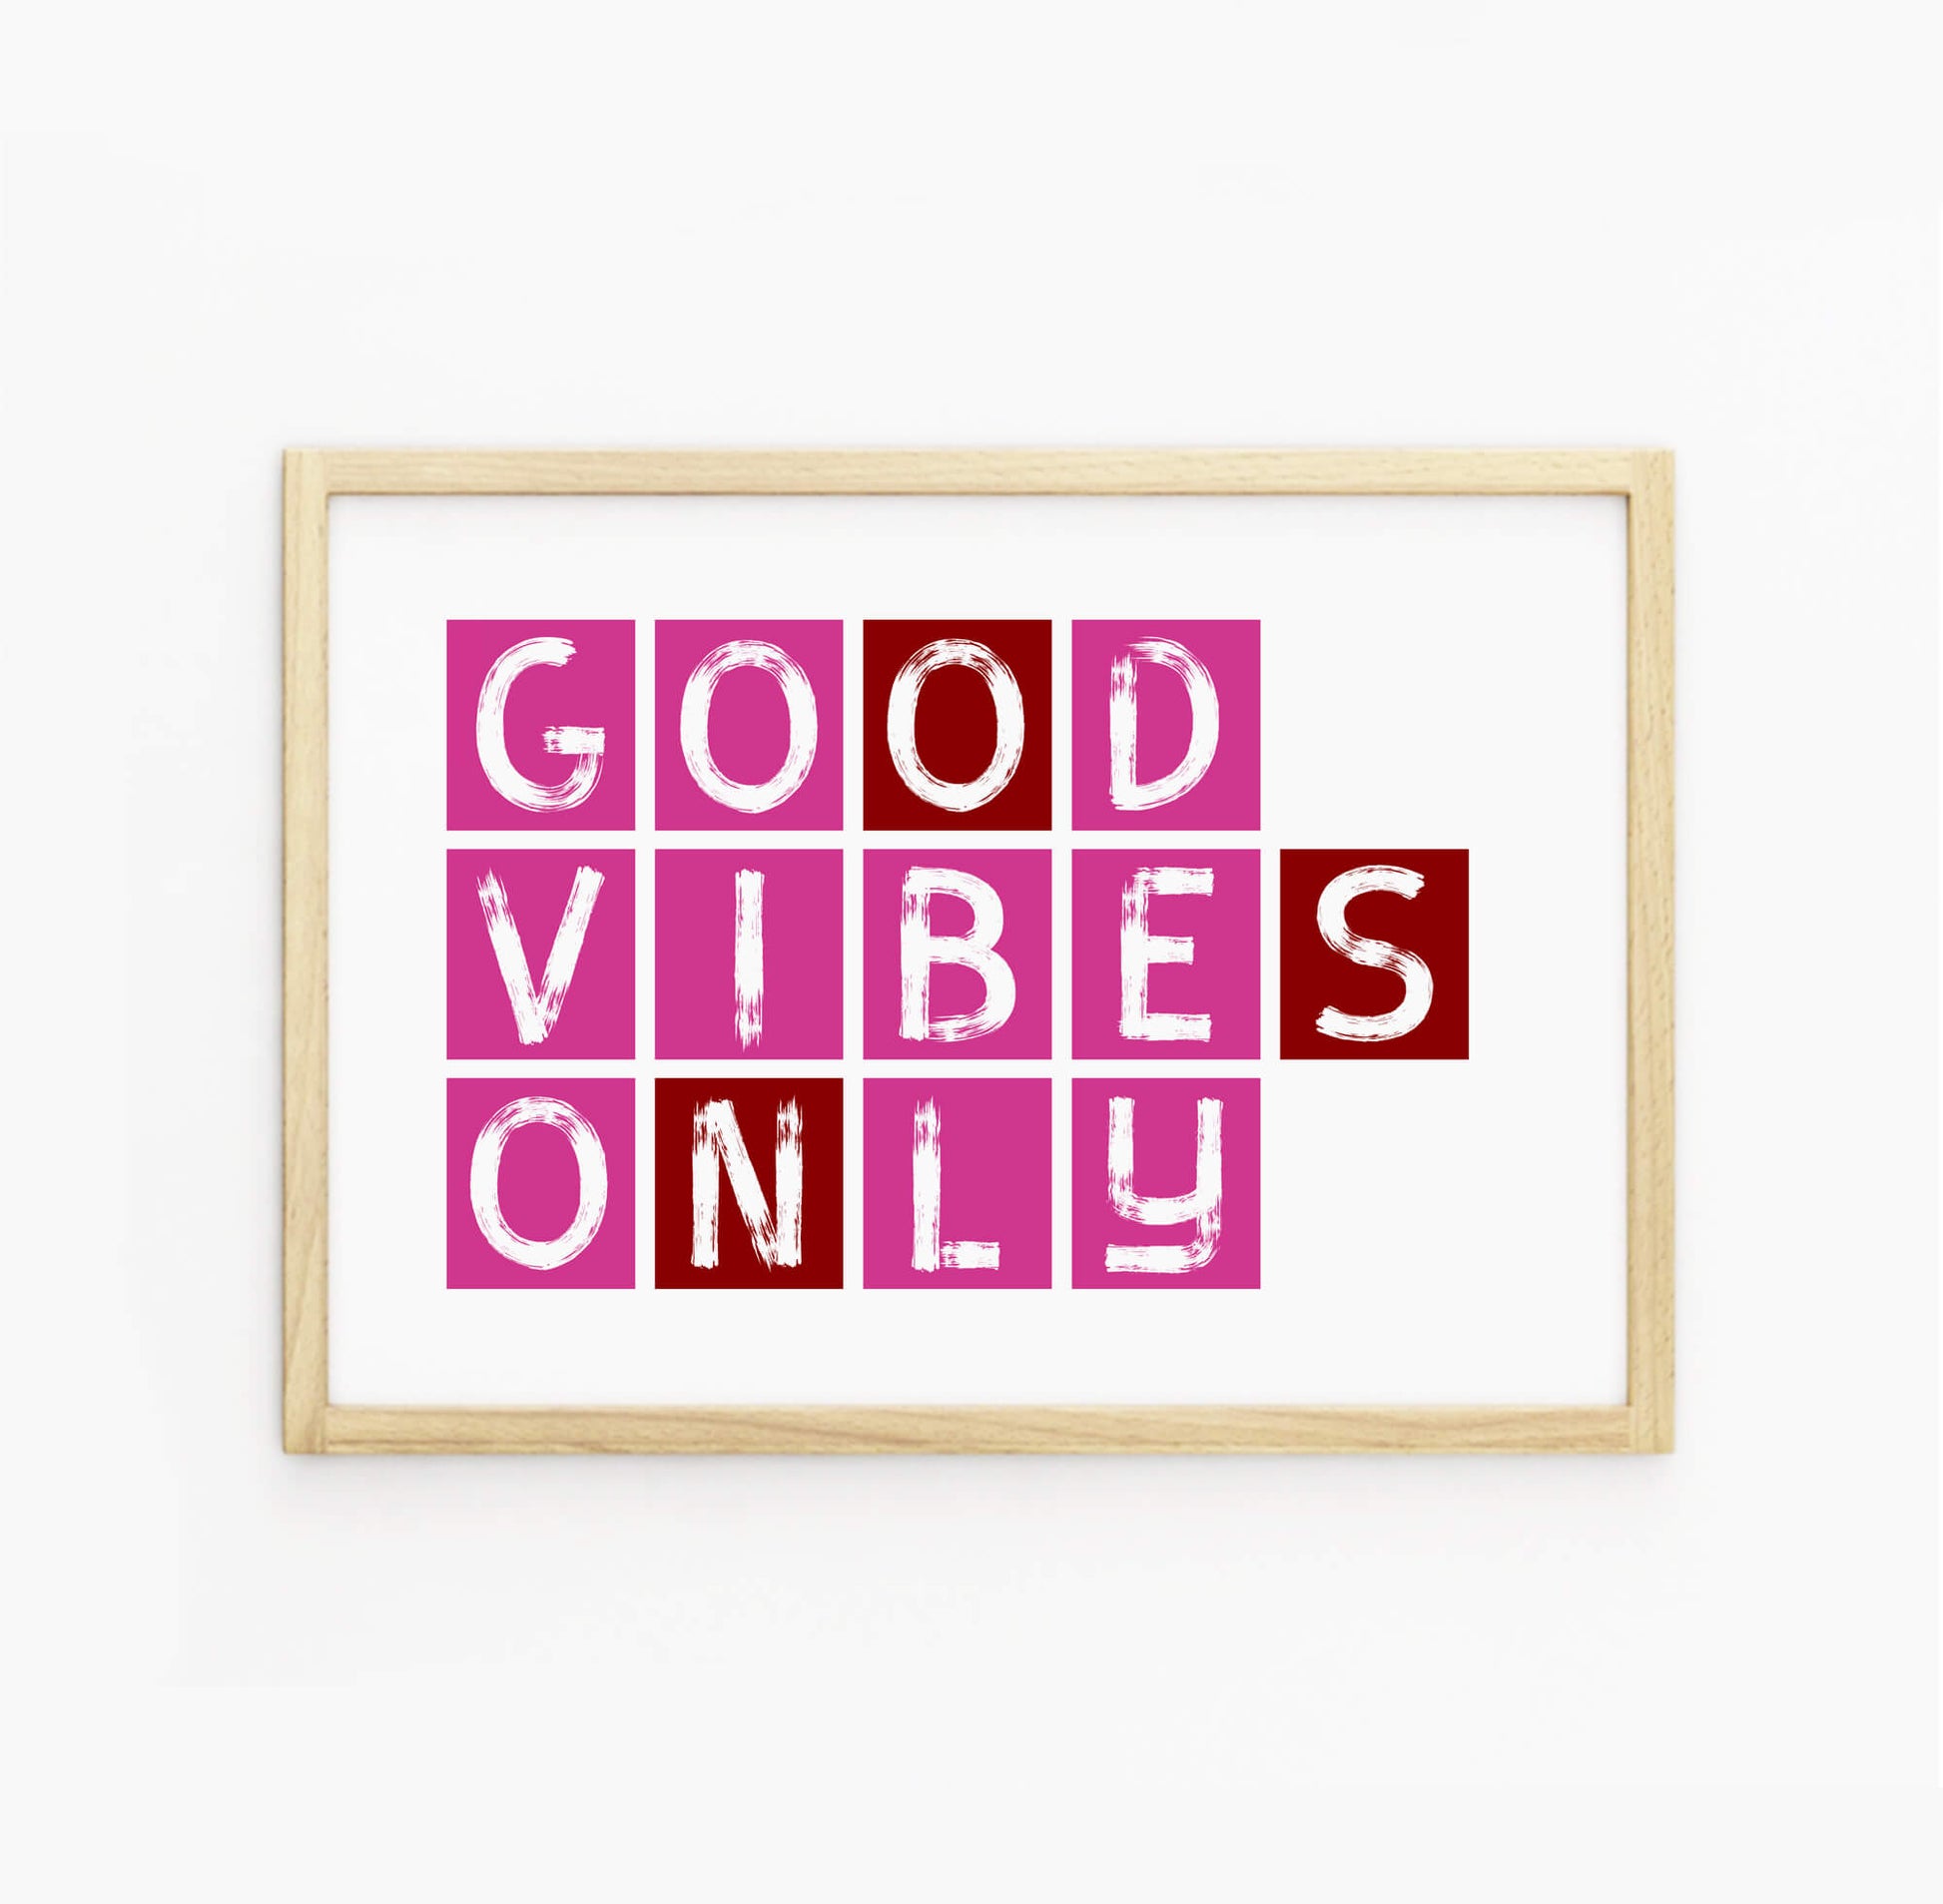 Good Vibes Only Print-SixElevenCreations-SEL0001A5